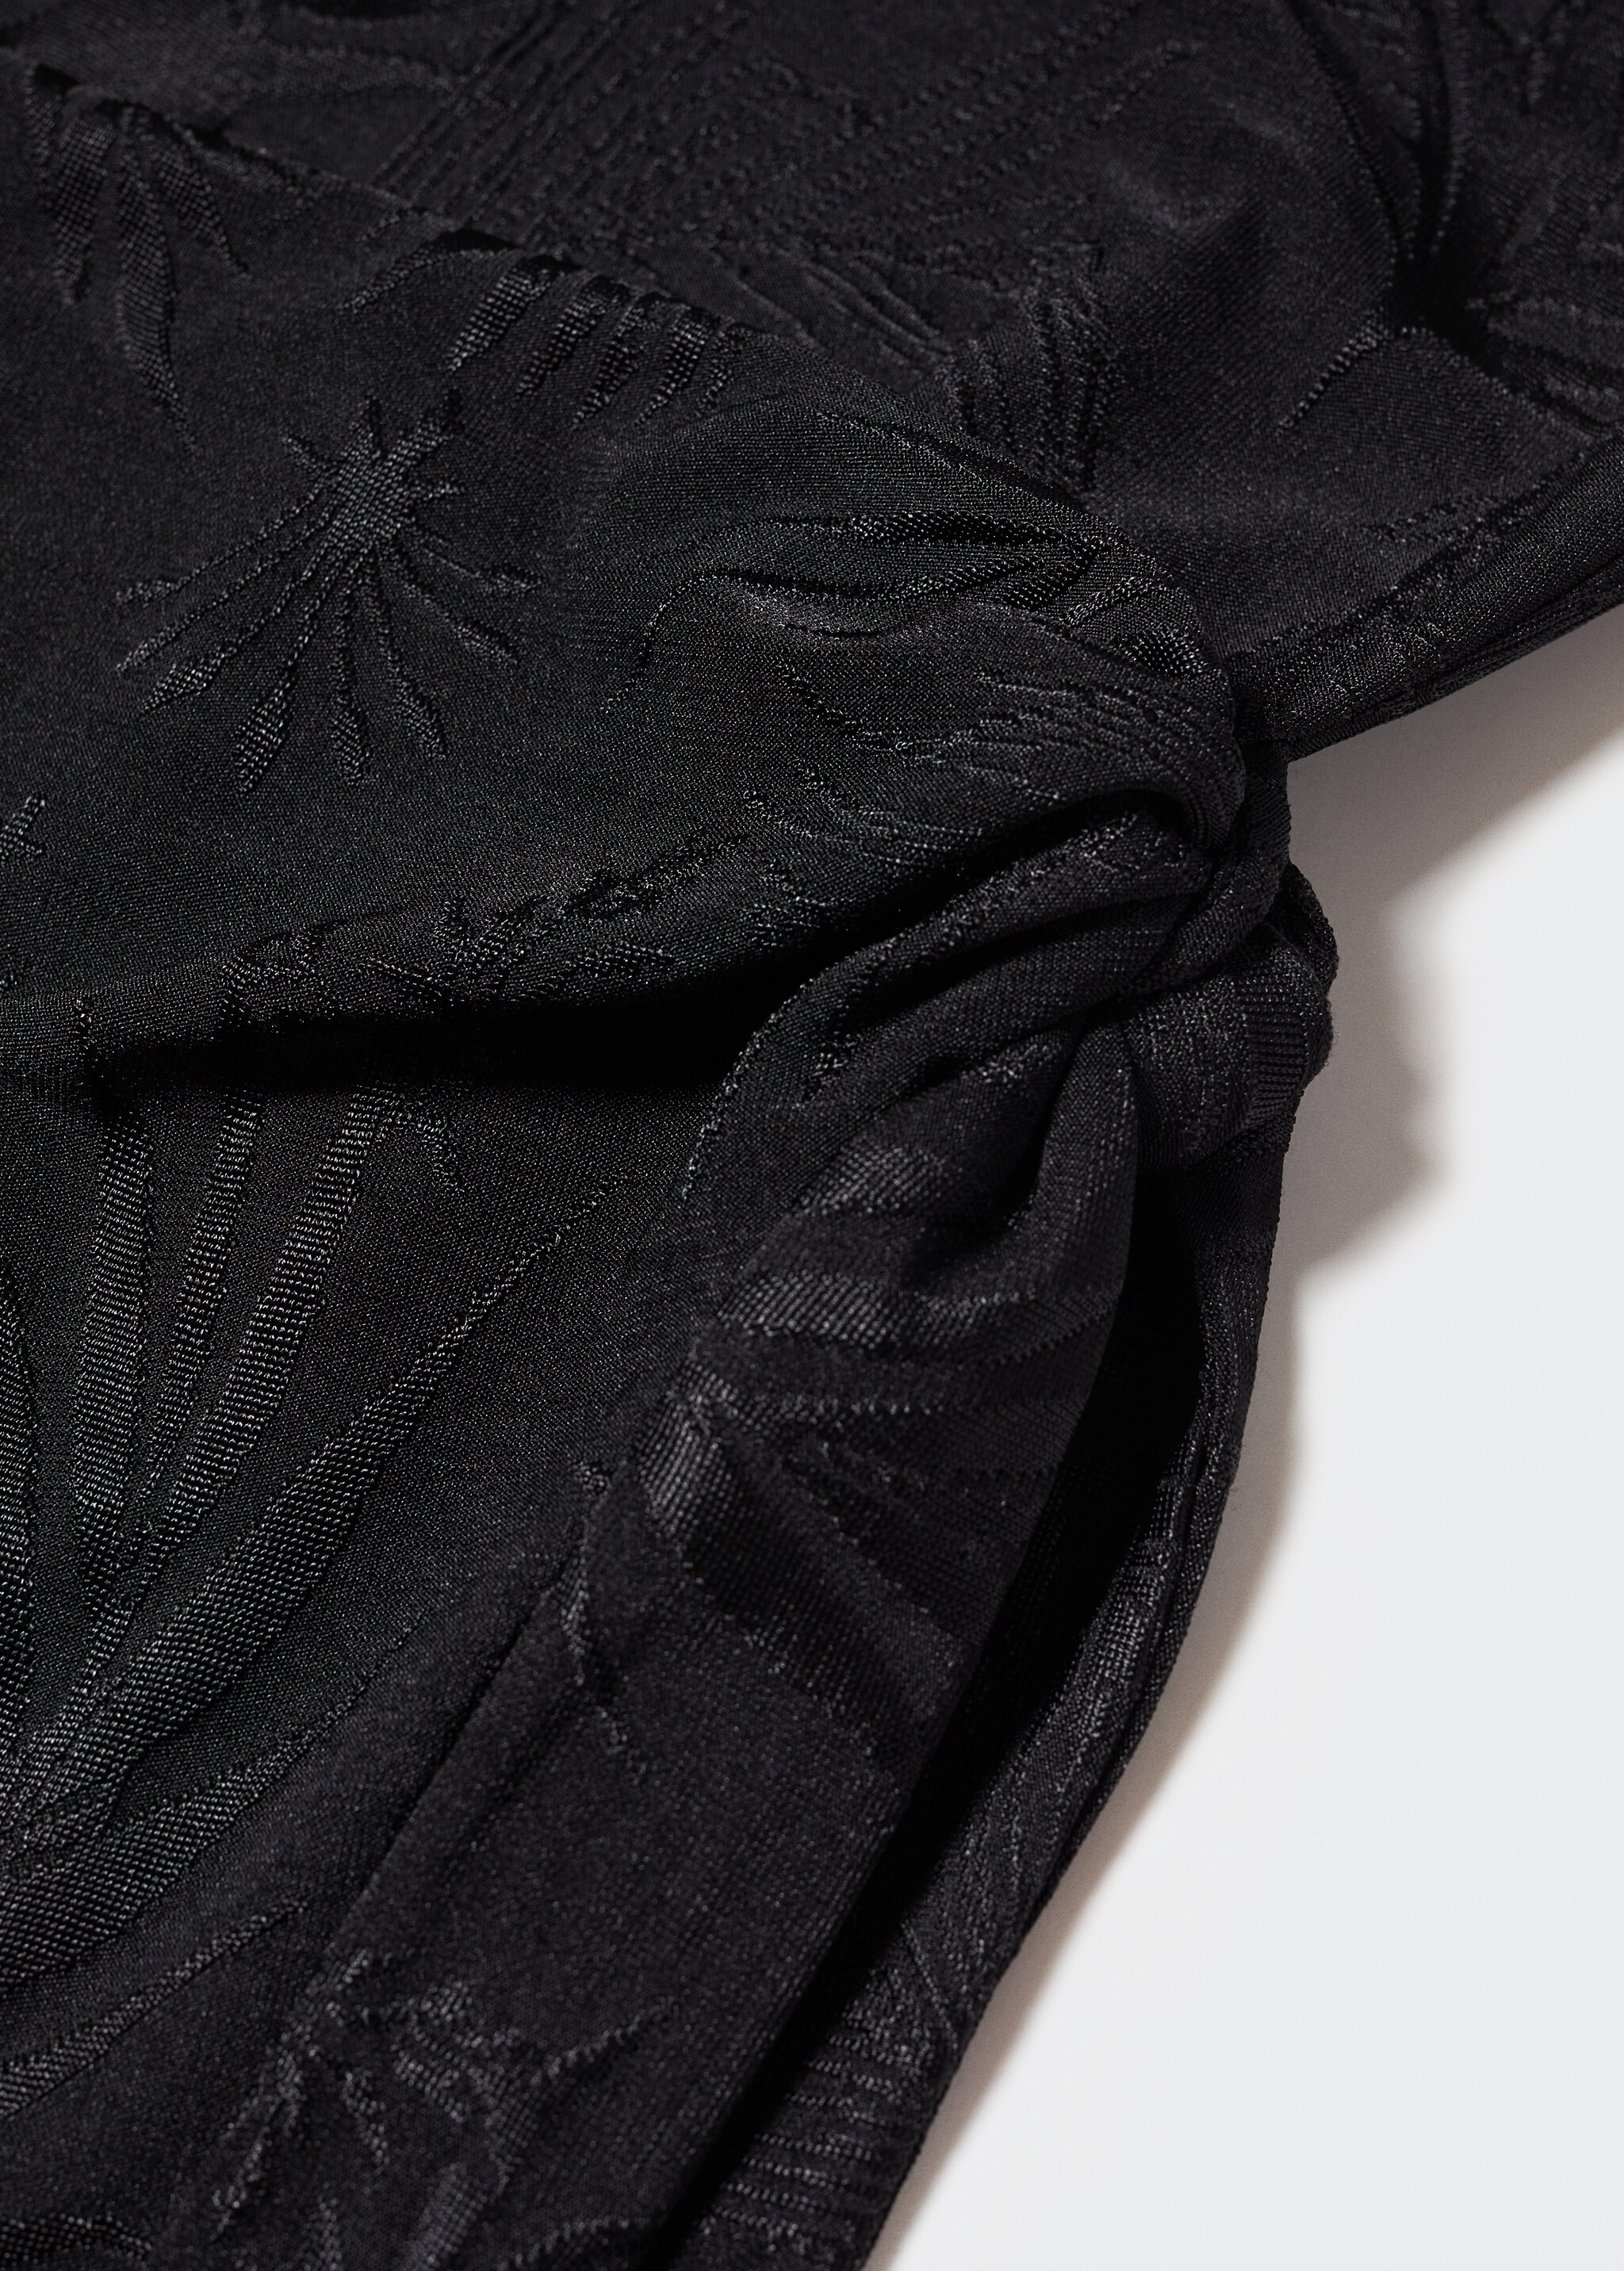 Knotted jacquard dress - Details of the article 8